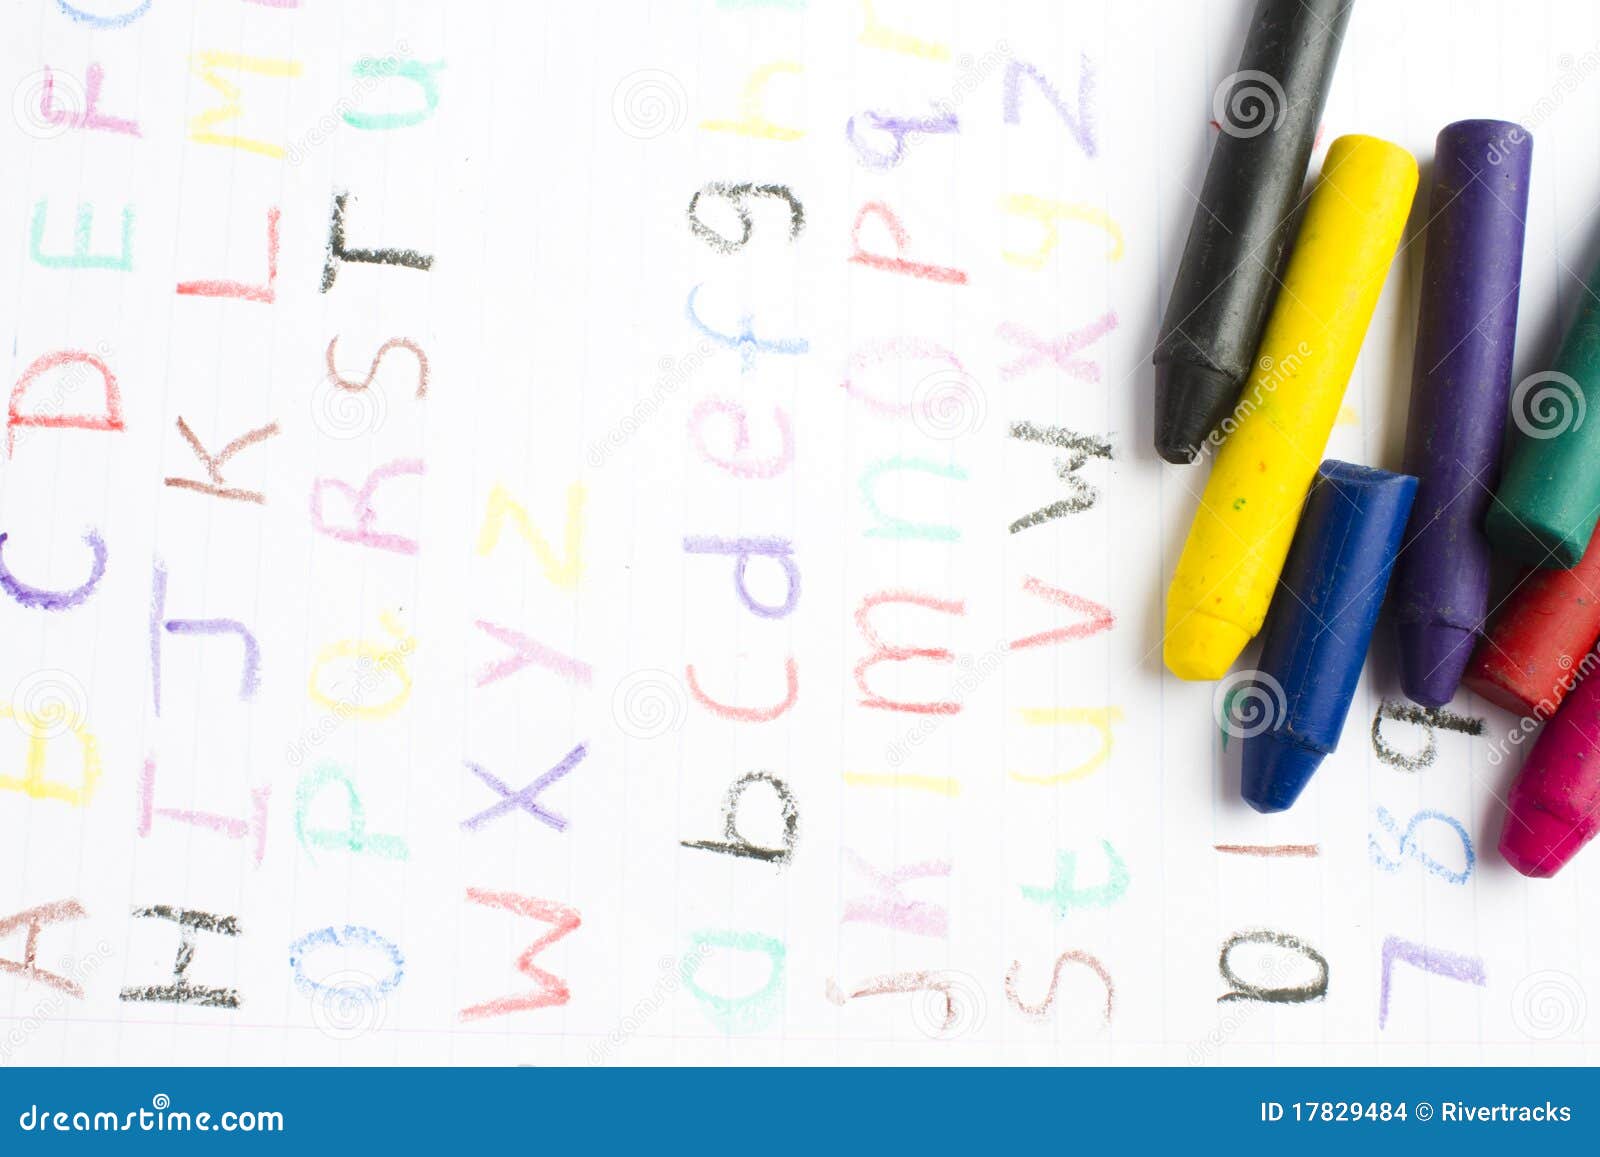 Childrens Writing With Wax Crayons Stock Photo - Image of school, crayola: 178294841300 x 957